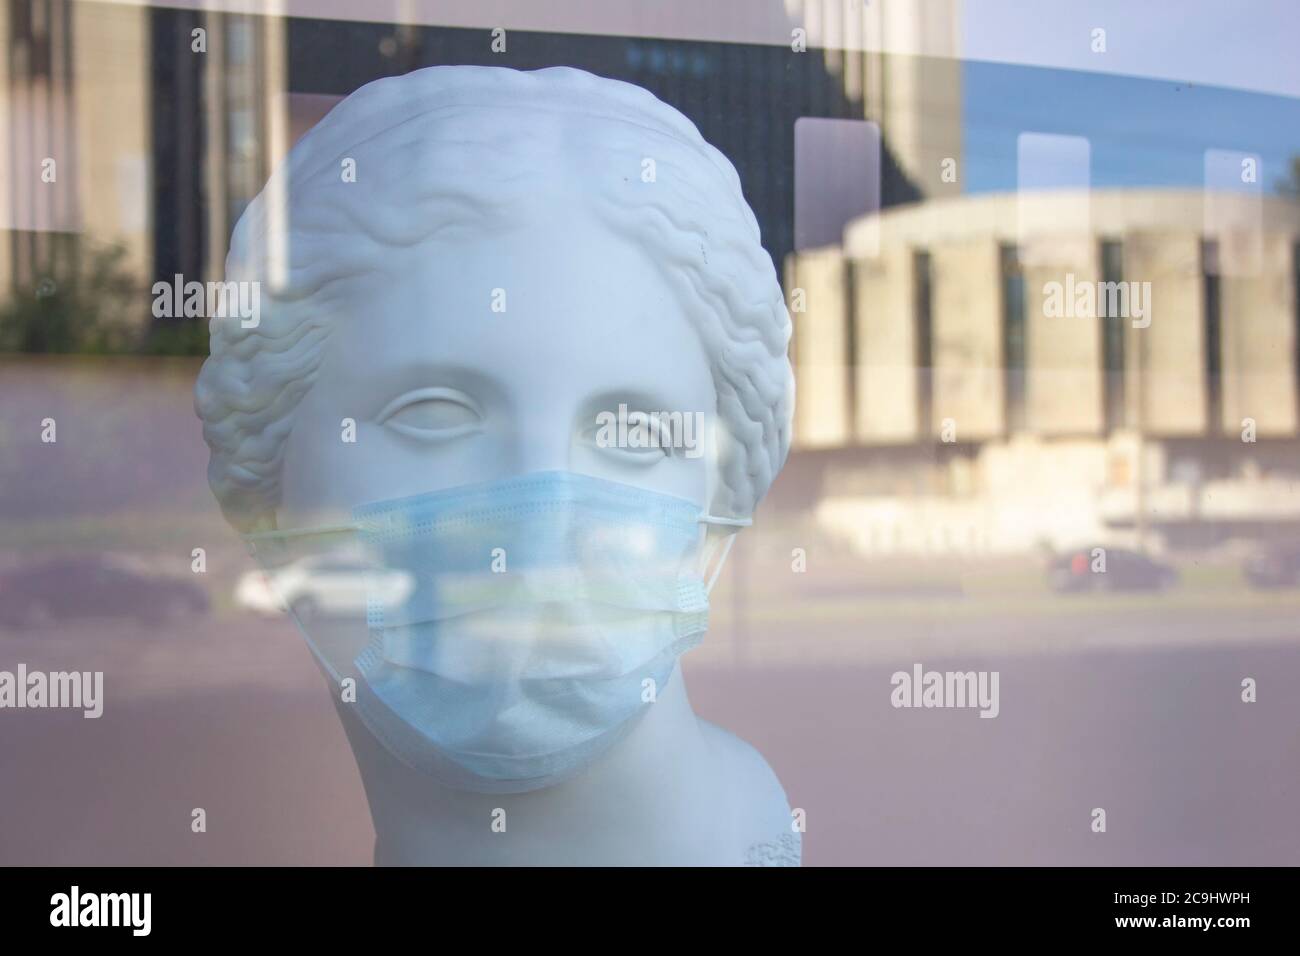 a man, woman plaster bust in a protective medical mask behind a plate-glass window with reflection of city streets Stock Photo